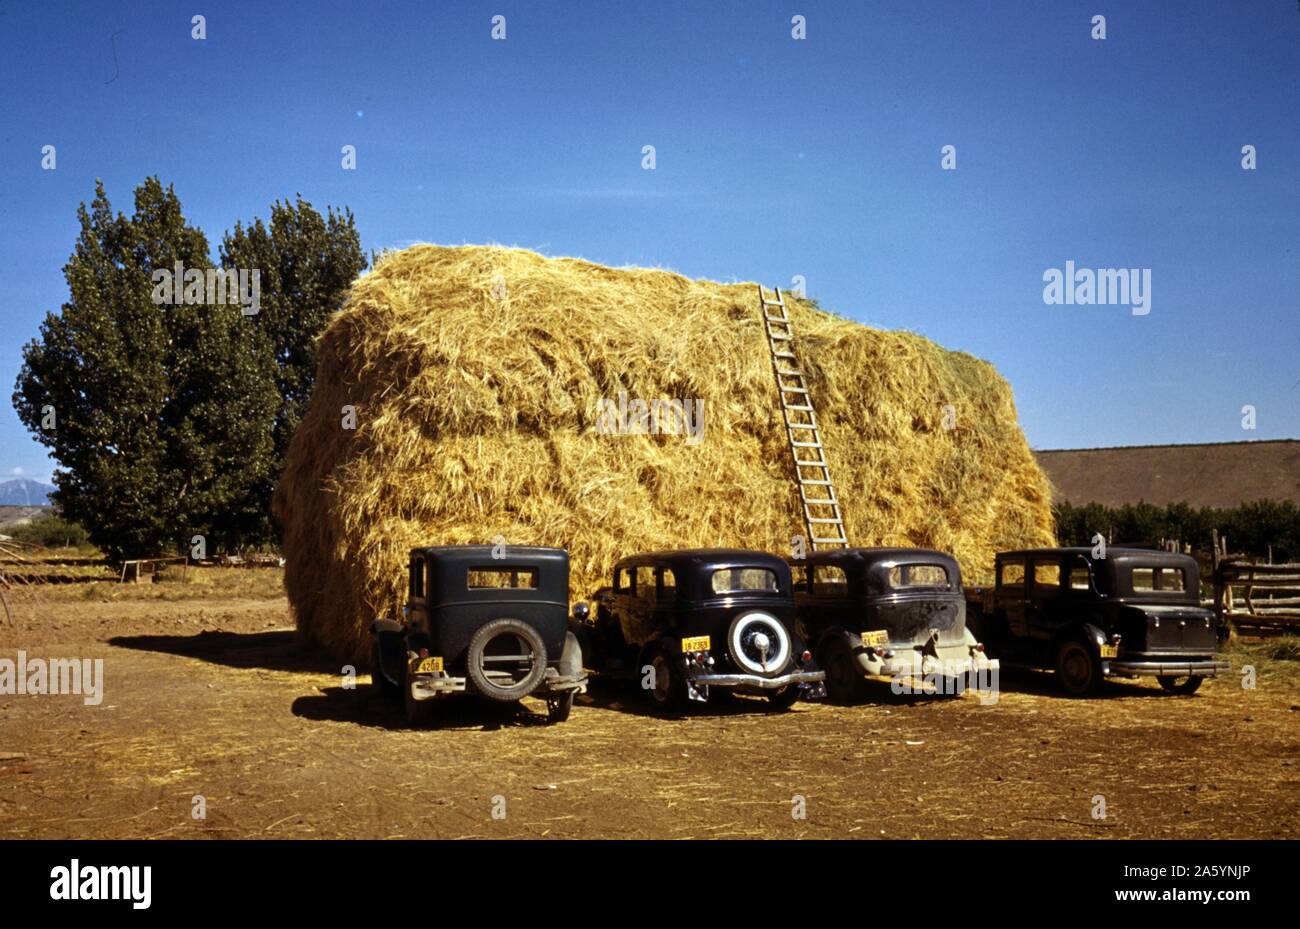 Hay stack and automobiles belonging to farm workers, Delta County, Colorado USA. 1940 U.S. Office of War Information, 1944. Stock Photo